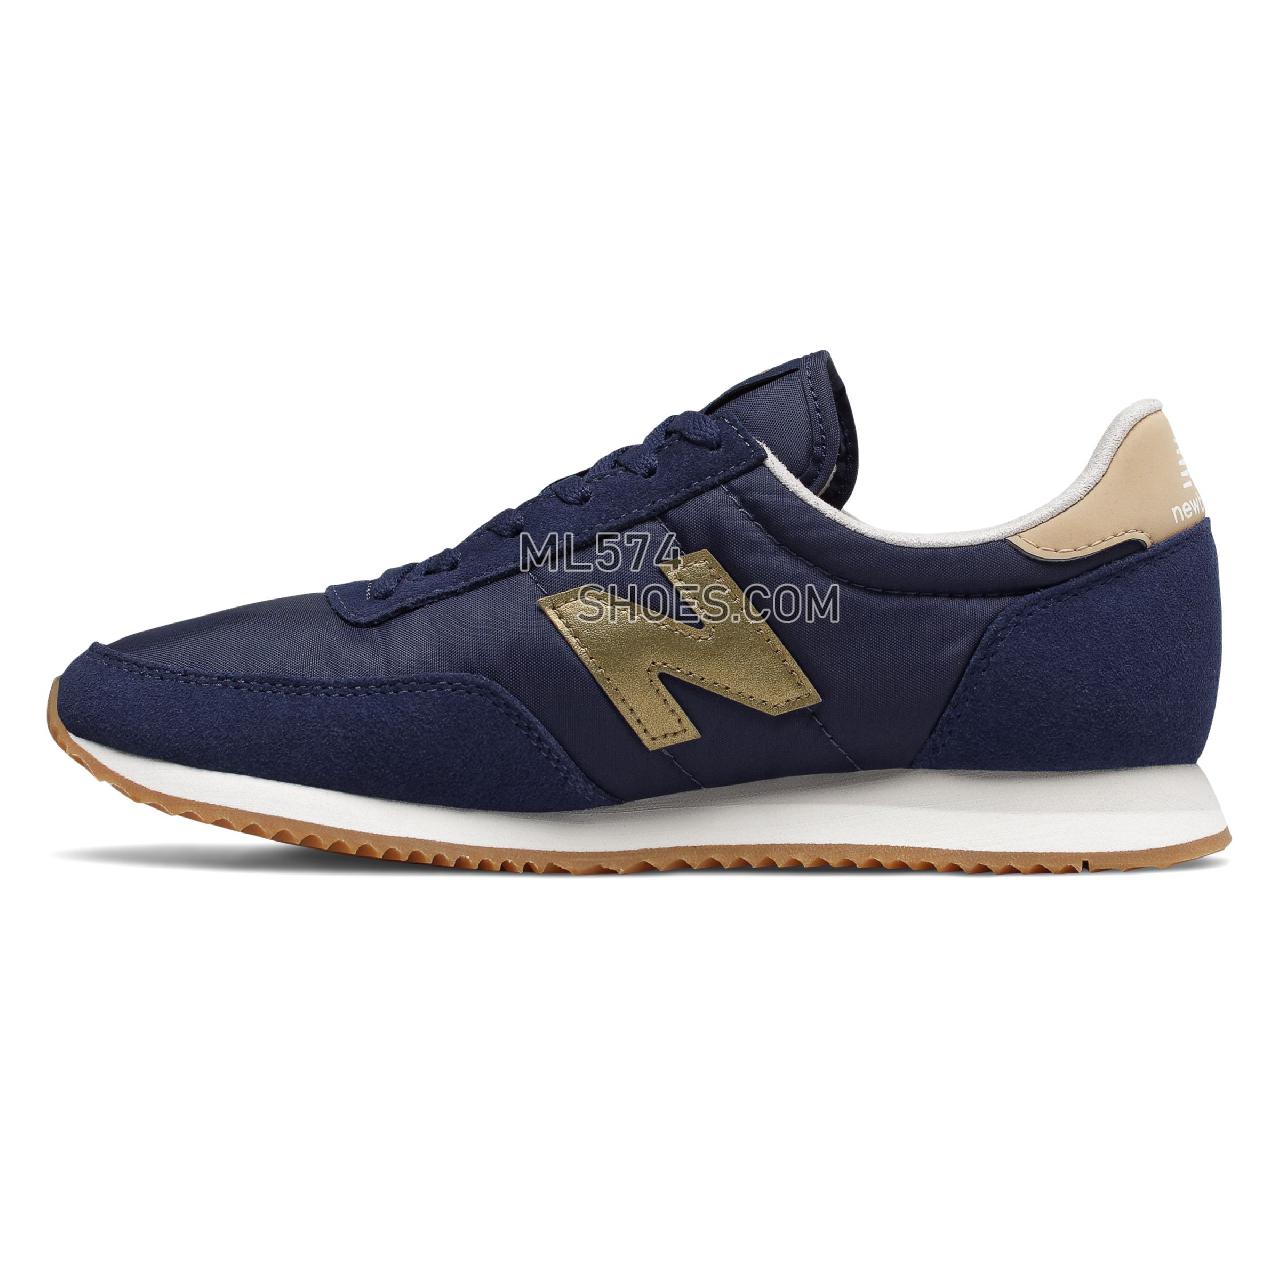 New Balance 720 - Women's Whats Trending - Pigment with Classic Gold - WL720AA